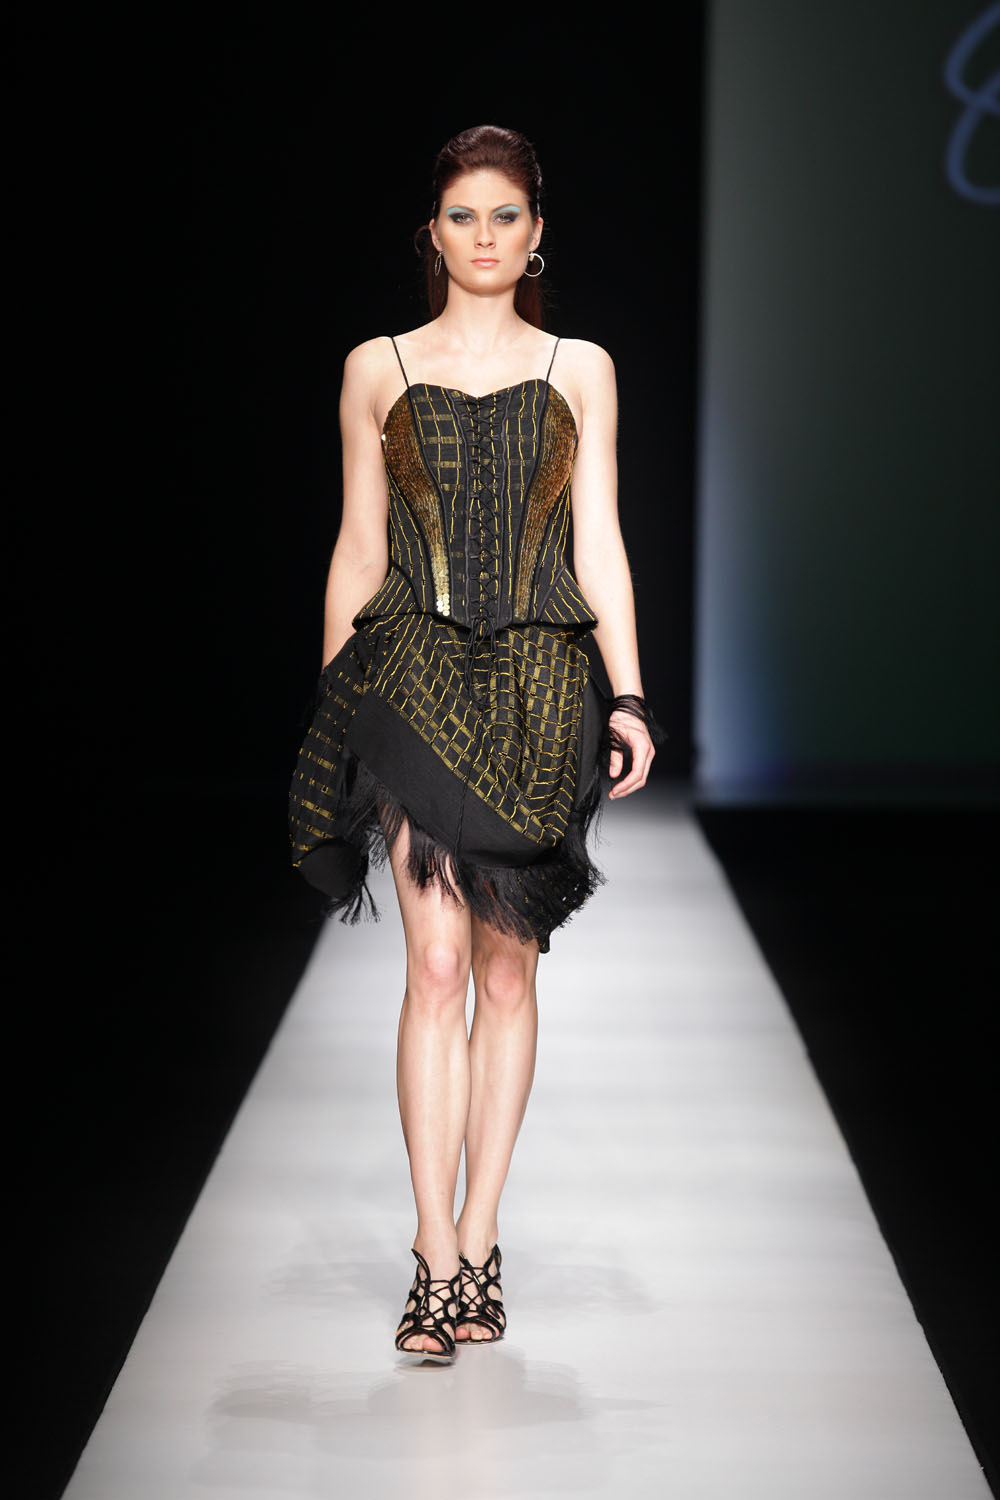 Odio Mimonet at Arise Africa Fashion Week 2009